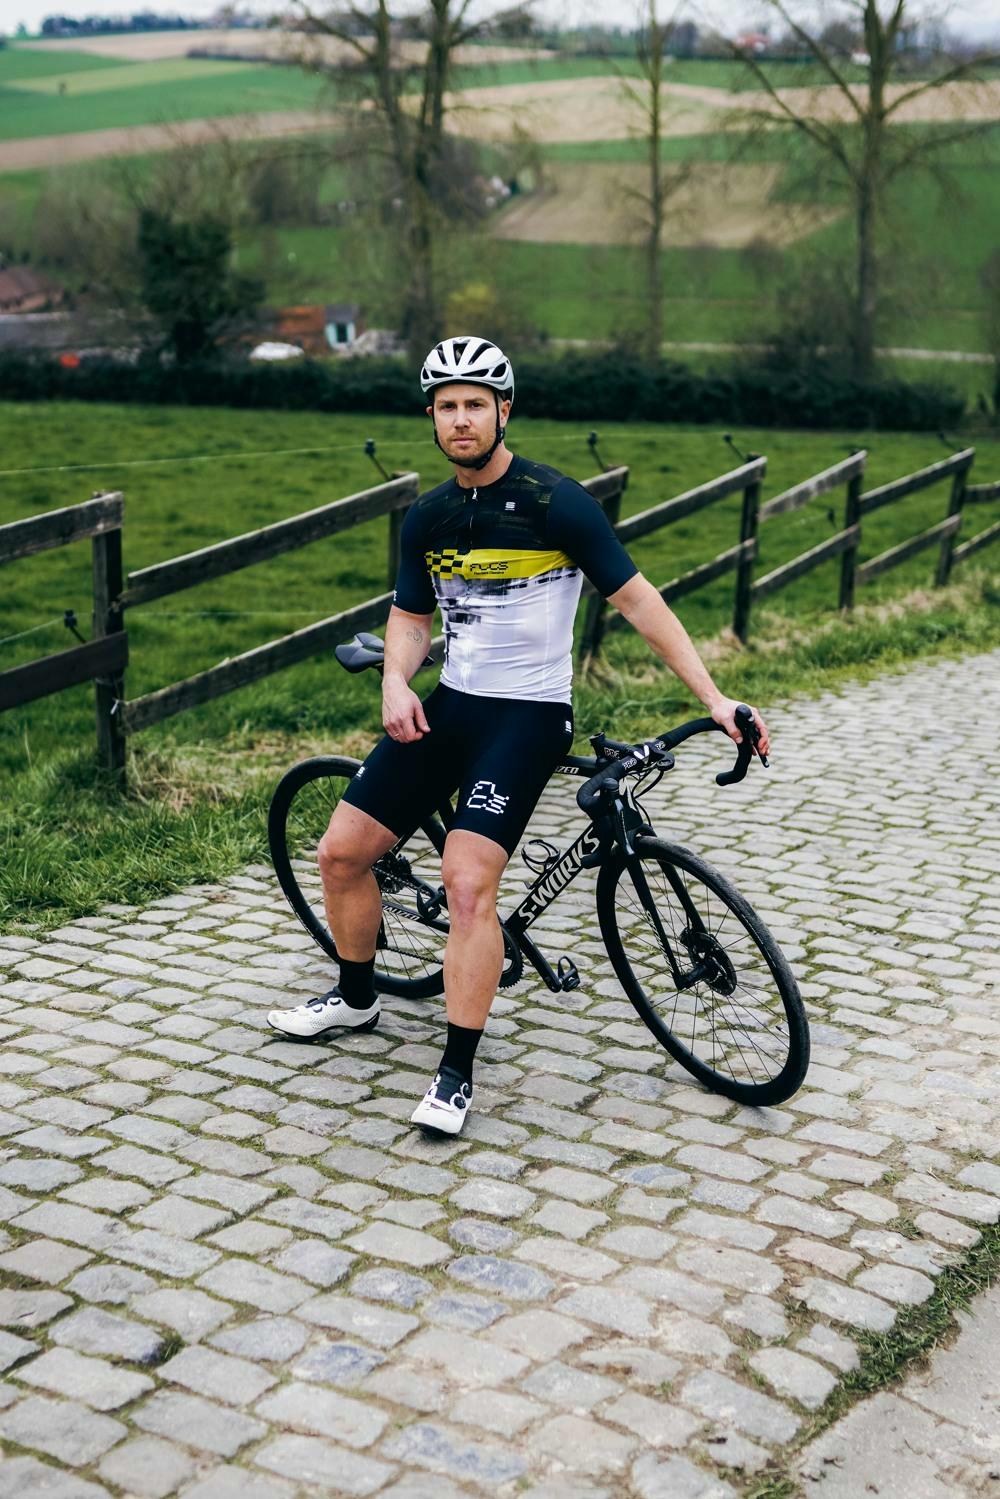 Win a signed Flanders Classics jersey